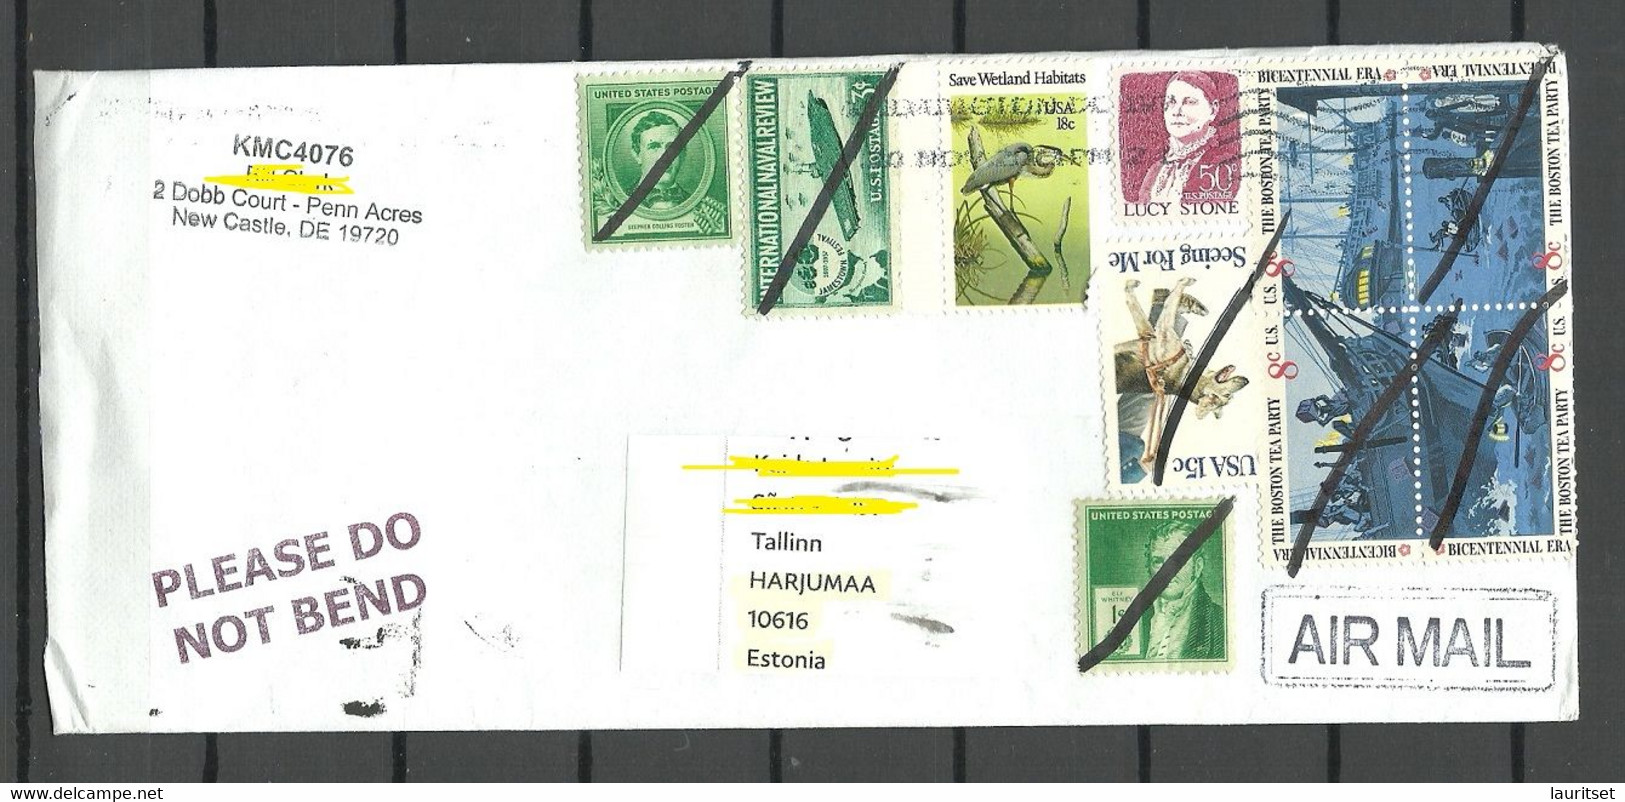 USA 2021 Cover To ESTONIA NB! Stamps Cancelled By Hand - Covers & Documents